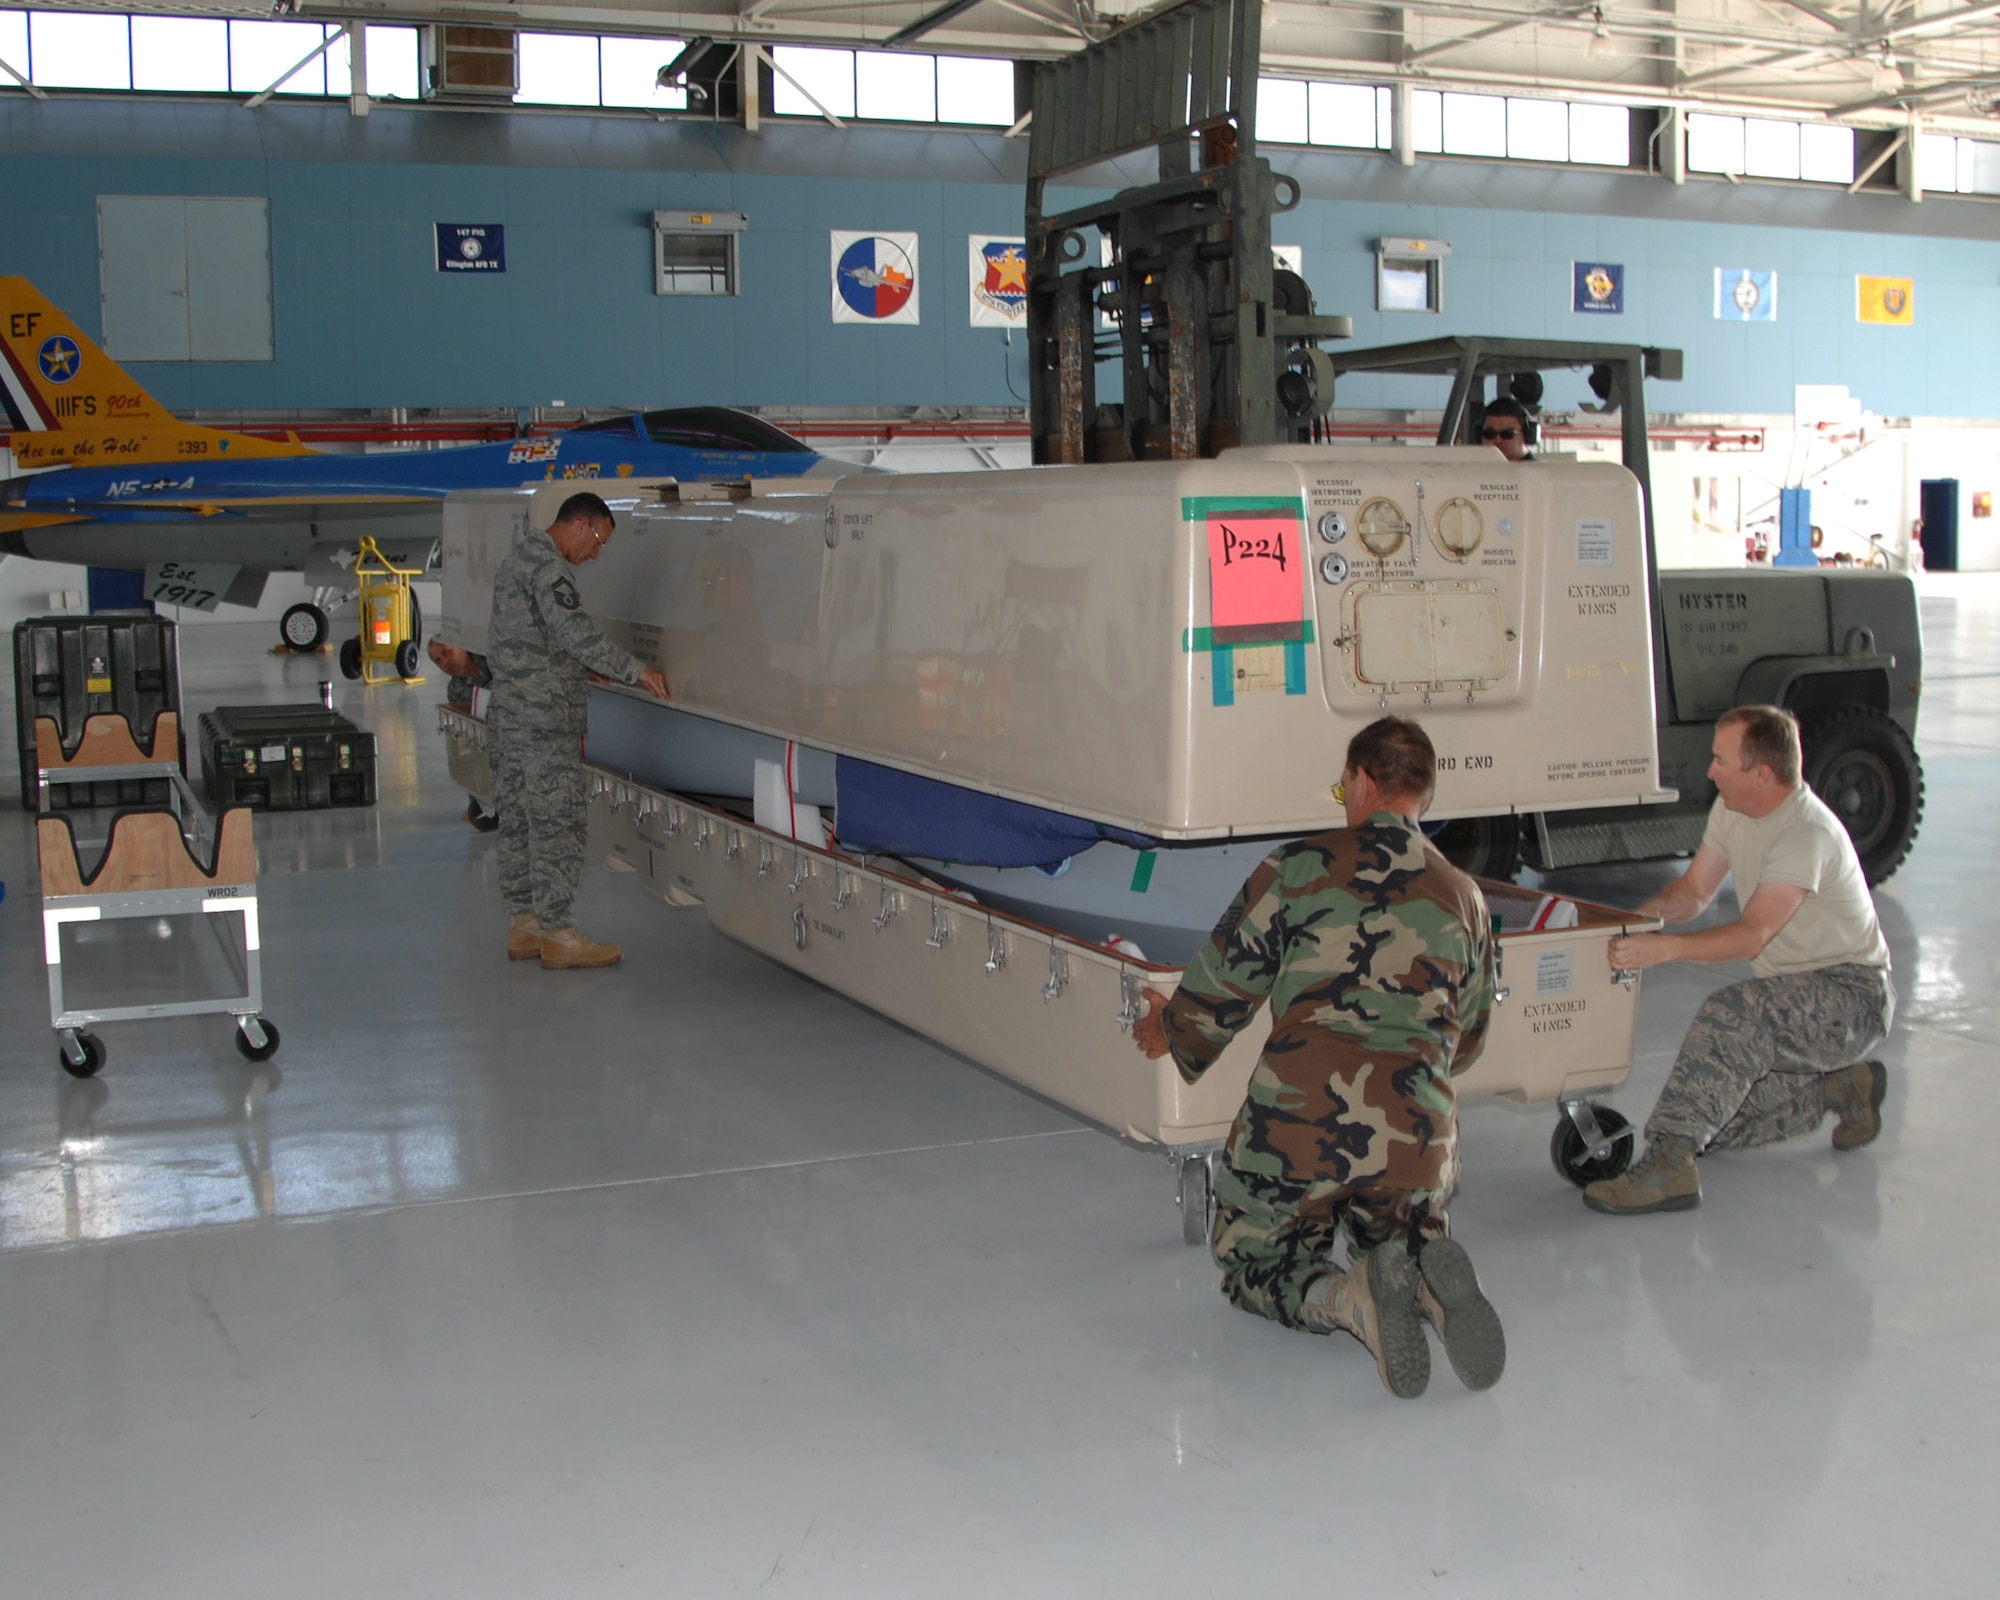 Members of the 147th Reconnaissance Wing Maintenance Wing open the crate holding an MQ-1 Predator at Ellington Field Joint Reserve Base in Houston on August 18, 2009. The wing transitioned from the F-16 to the MQ-1 and this is the first Predator delivered to the unit.